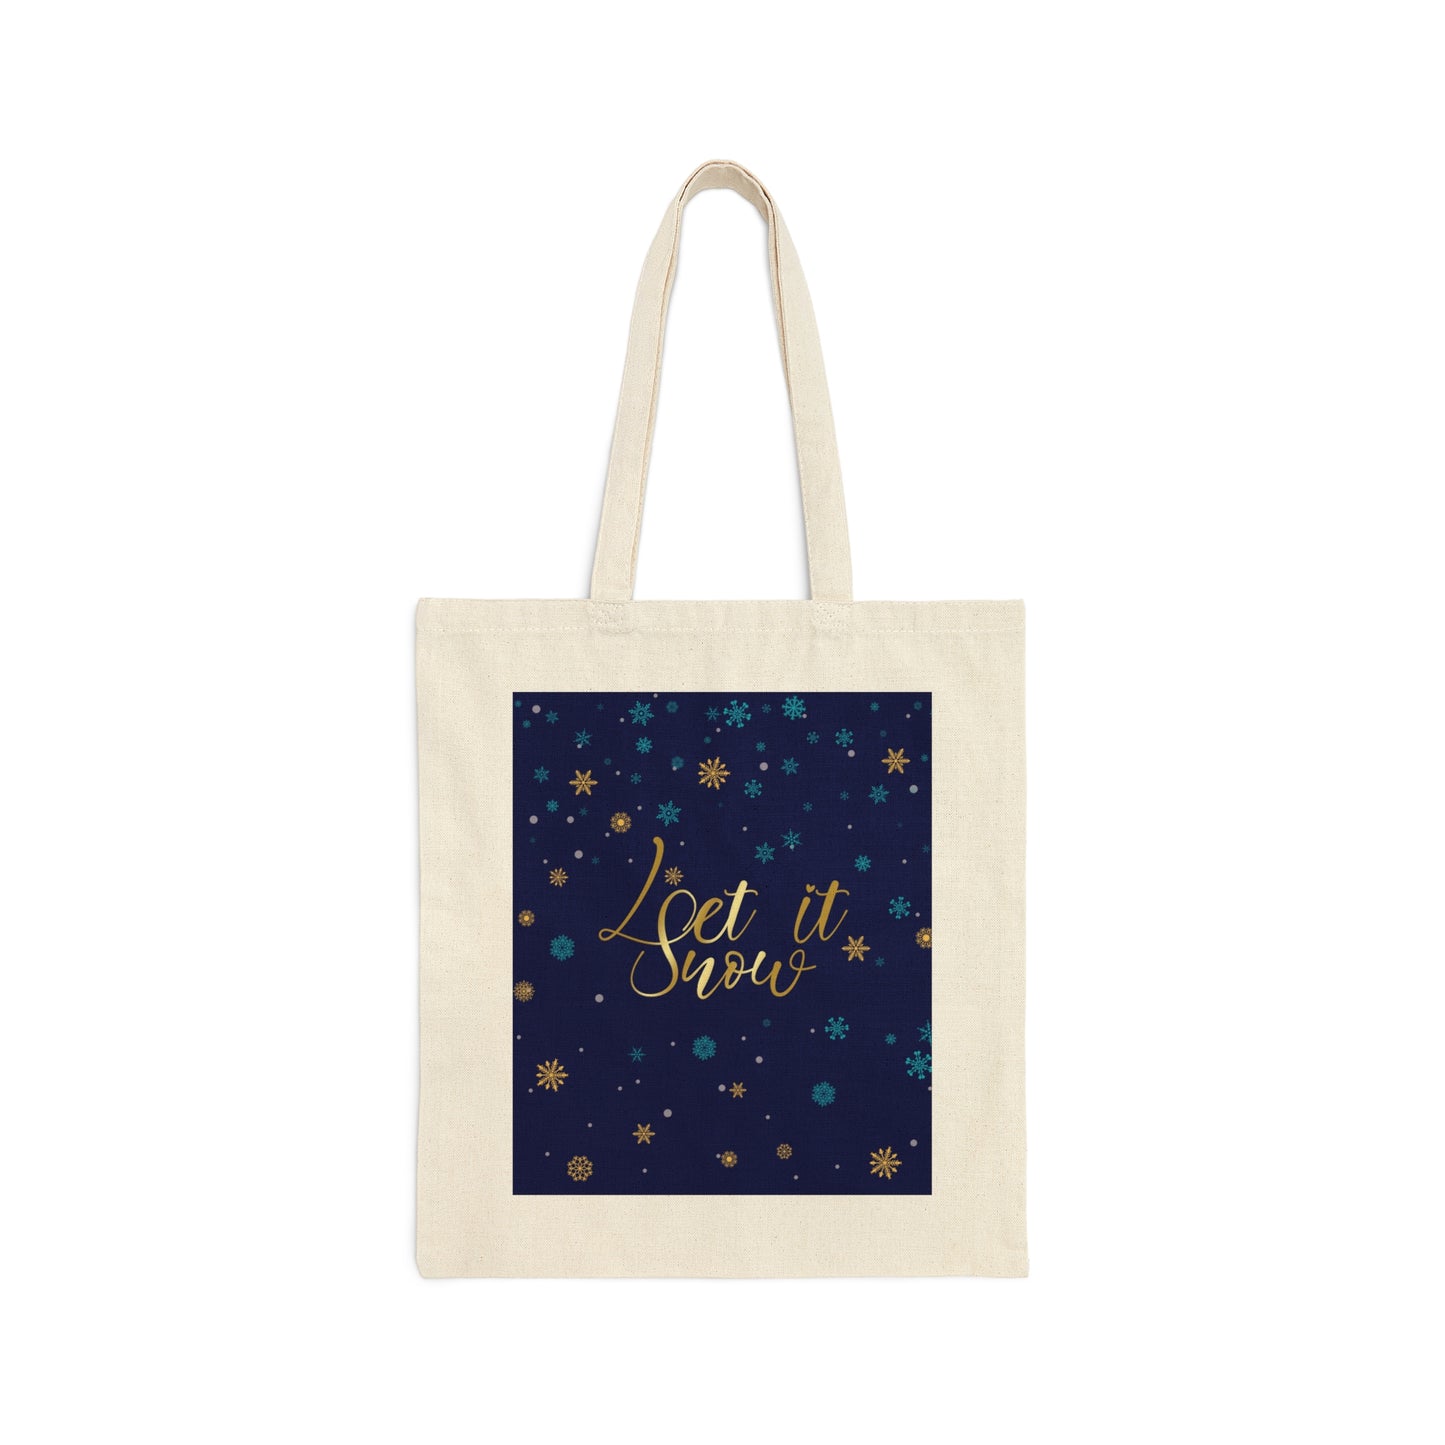 Let it Snow Pattern Christmas Typography Canvas Shopping Cotton Tote Bag